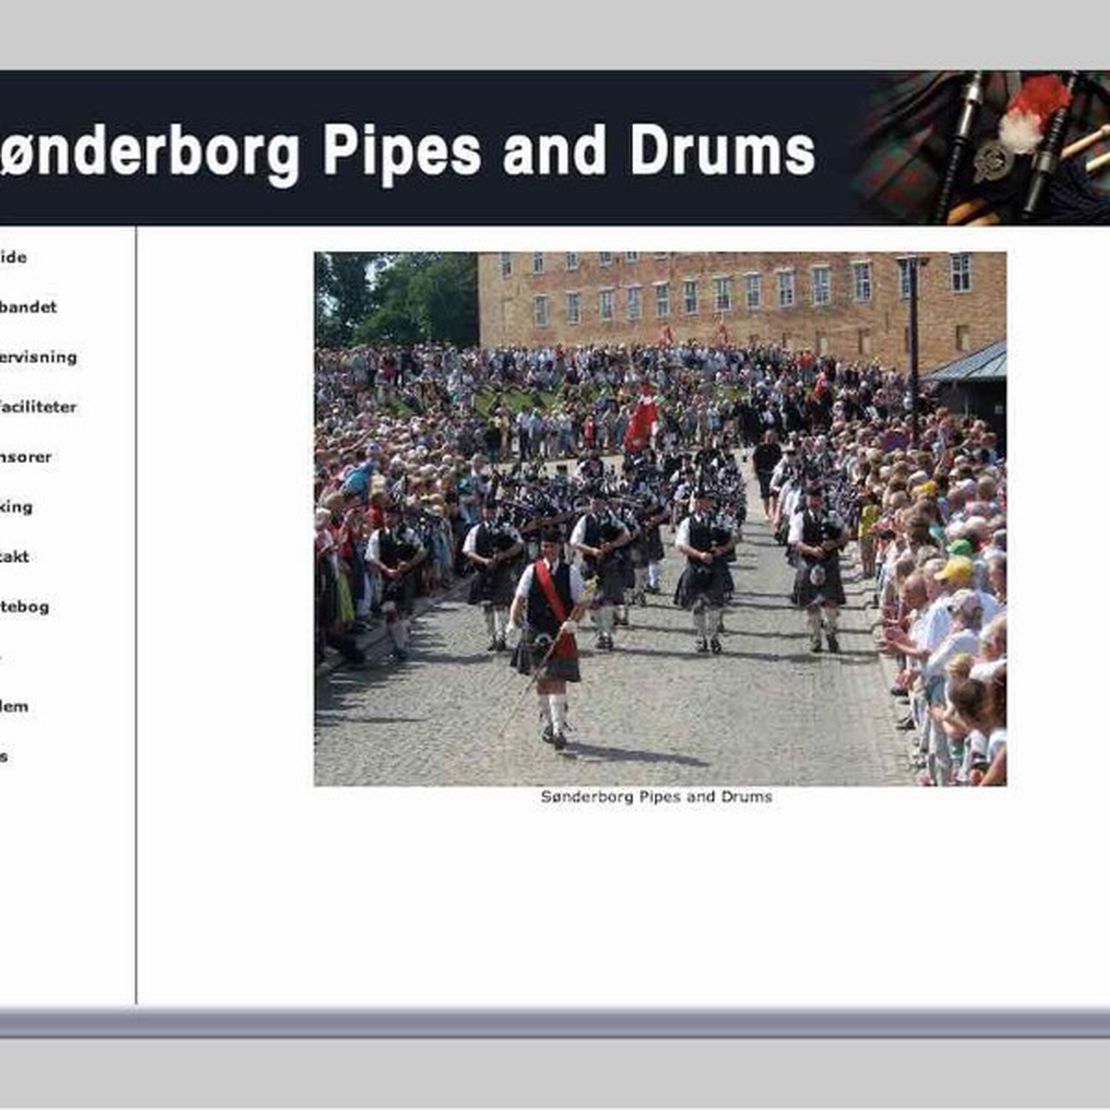 soenderborg pipes and drums